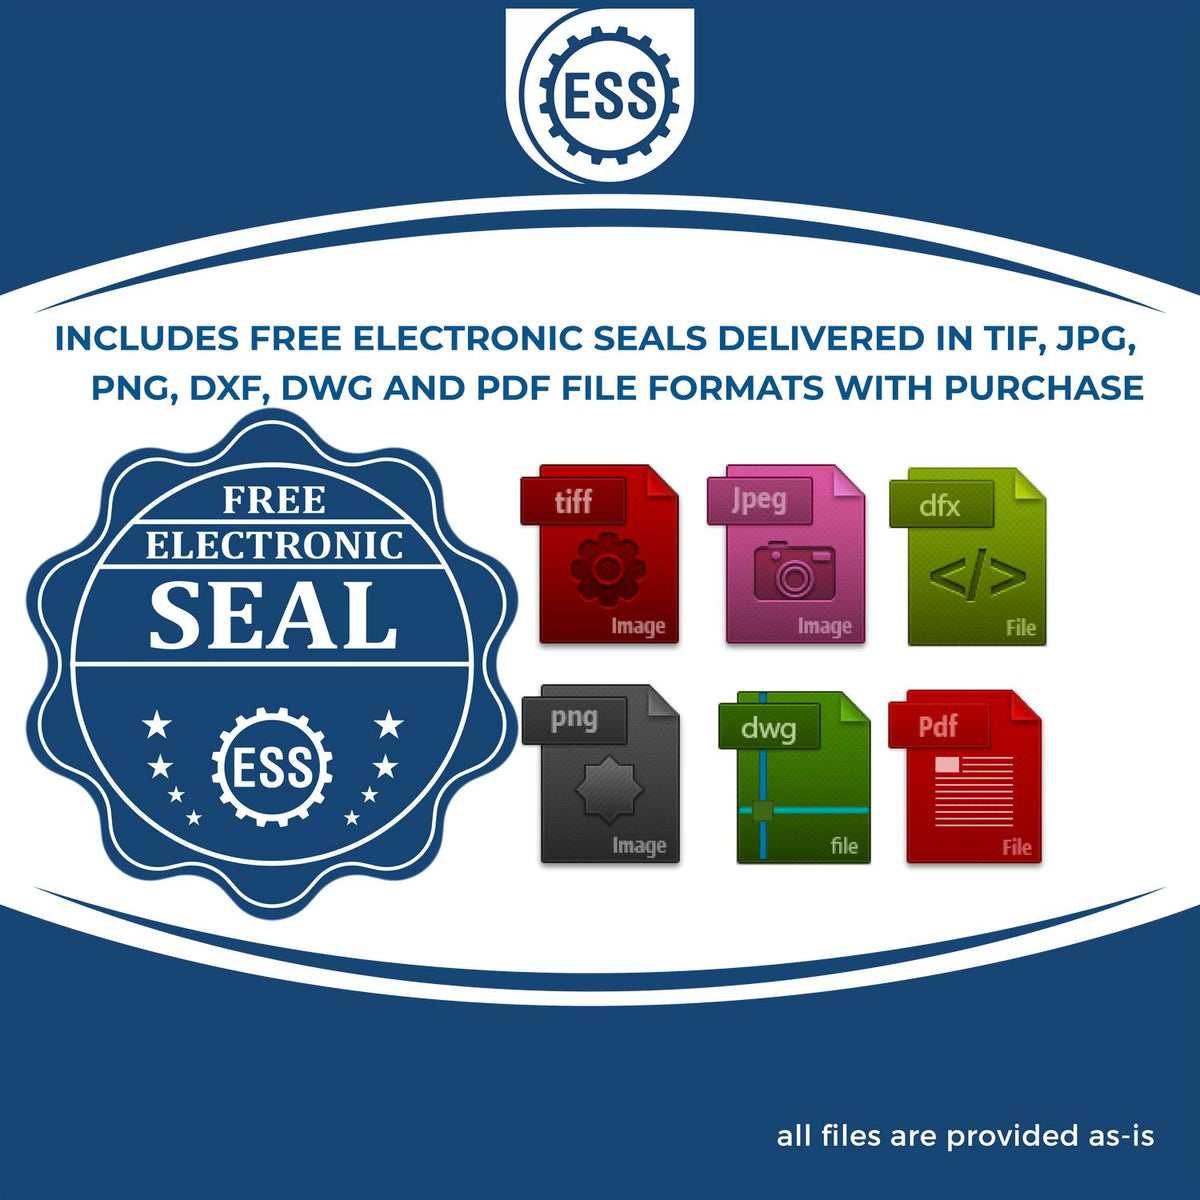 An infographic for the free electronic seal for the Long Reach Virginia Geology Seal illustrating the different file type icons such as DXF, DWG, TIF, JPG and PNG.